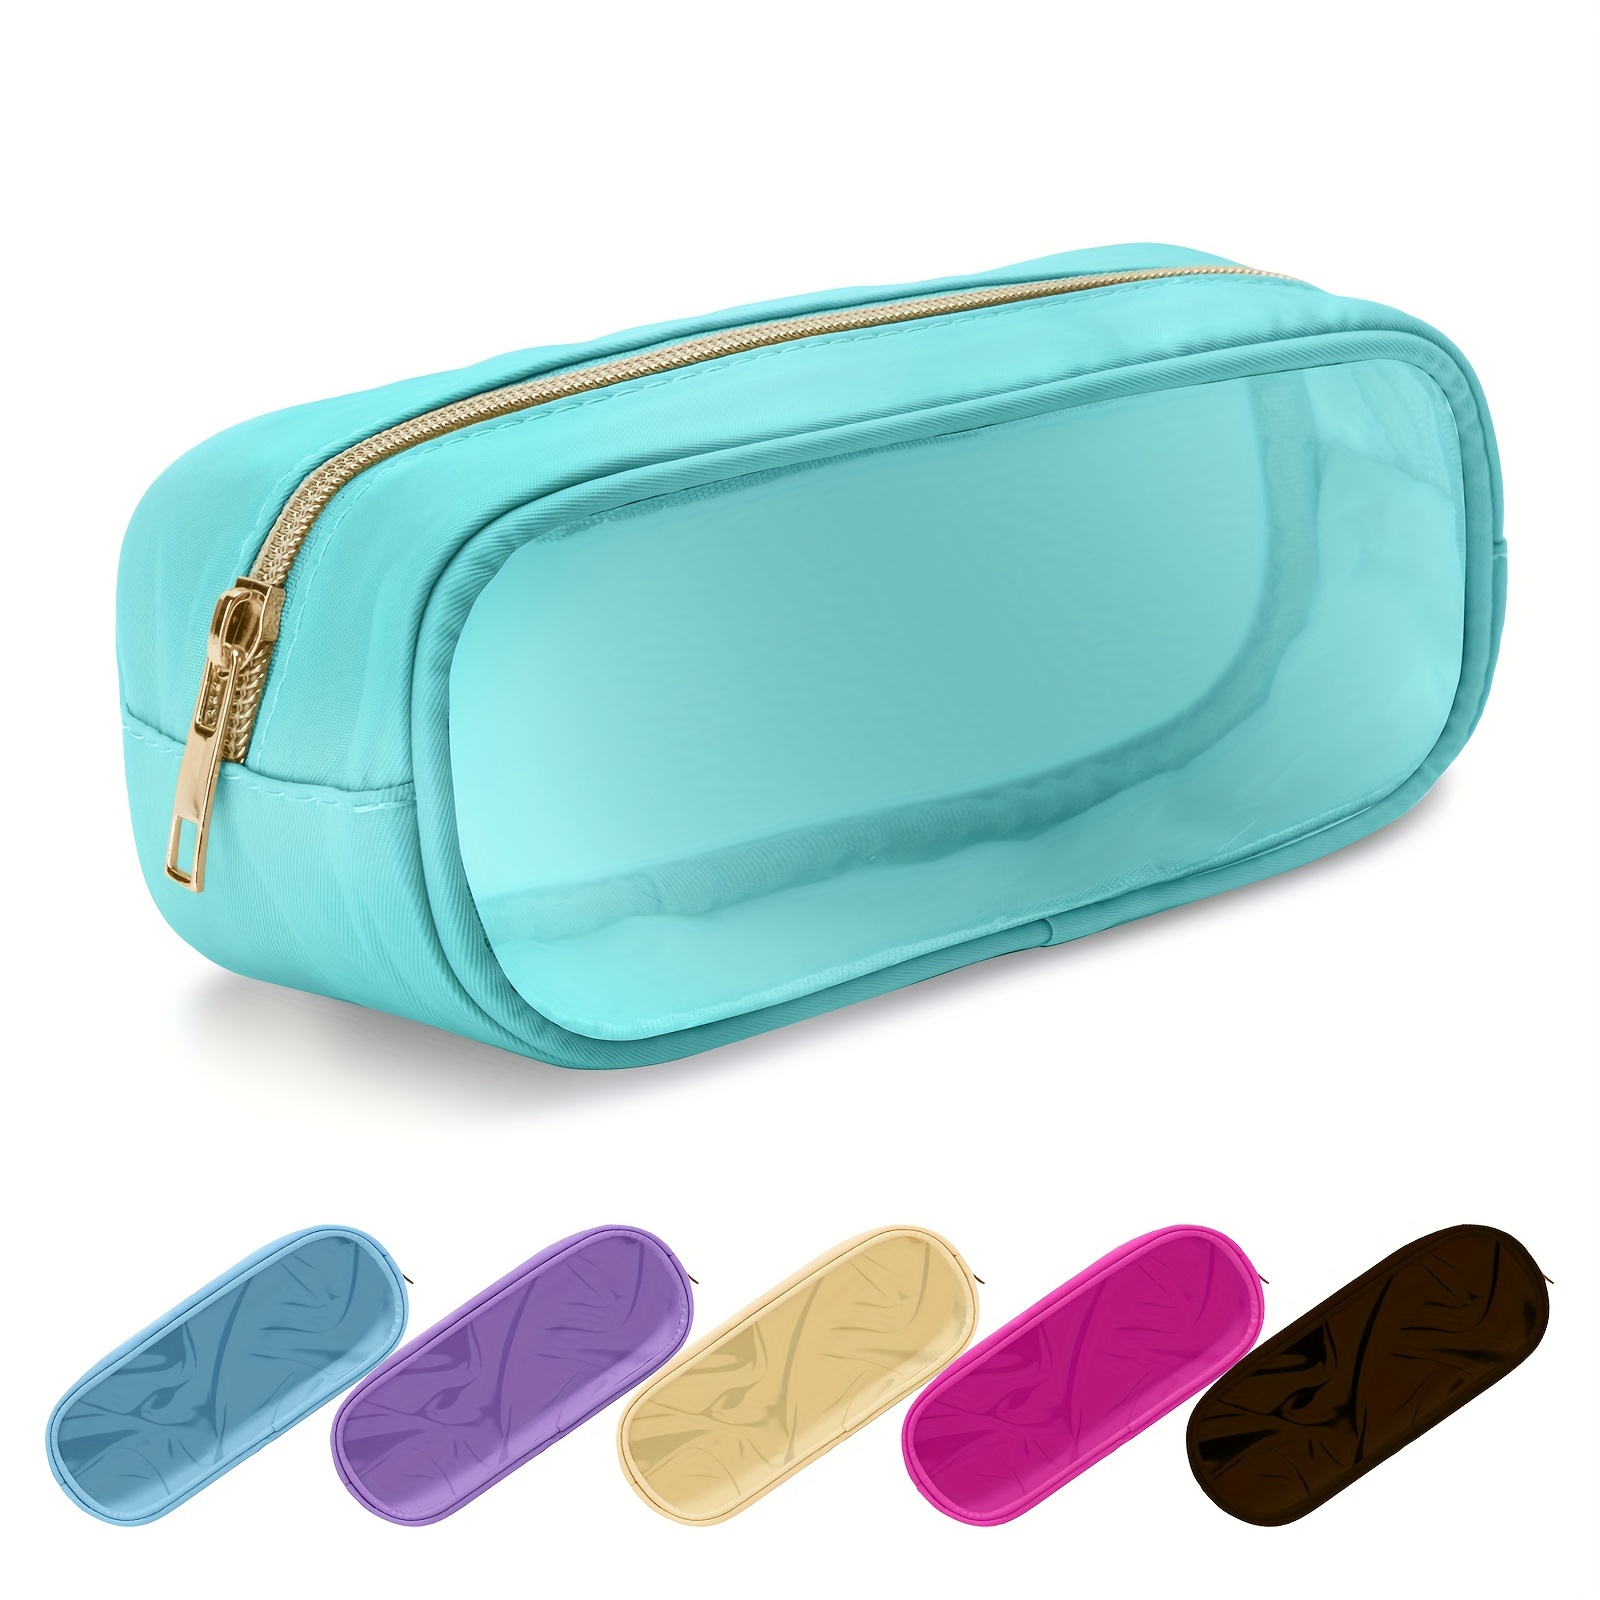  Waterproof Mini Makeup Bag Pouch for Purse,Small Cosmetic  Travel Bag Pouch Nylon Toiletry Organizers Bag for Women Girls,Cute Mini  Zipper Pouch Preppy Coin Purse for School Work Camping(Mini-Purple) : Beauty